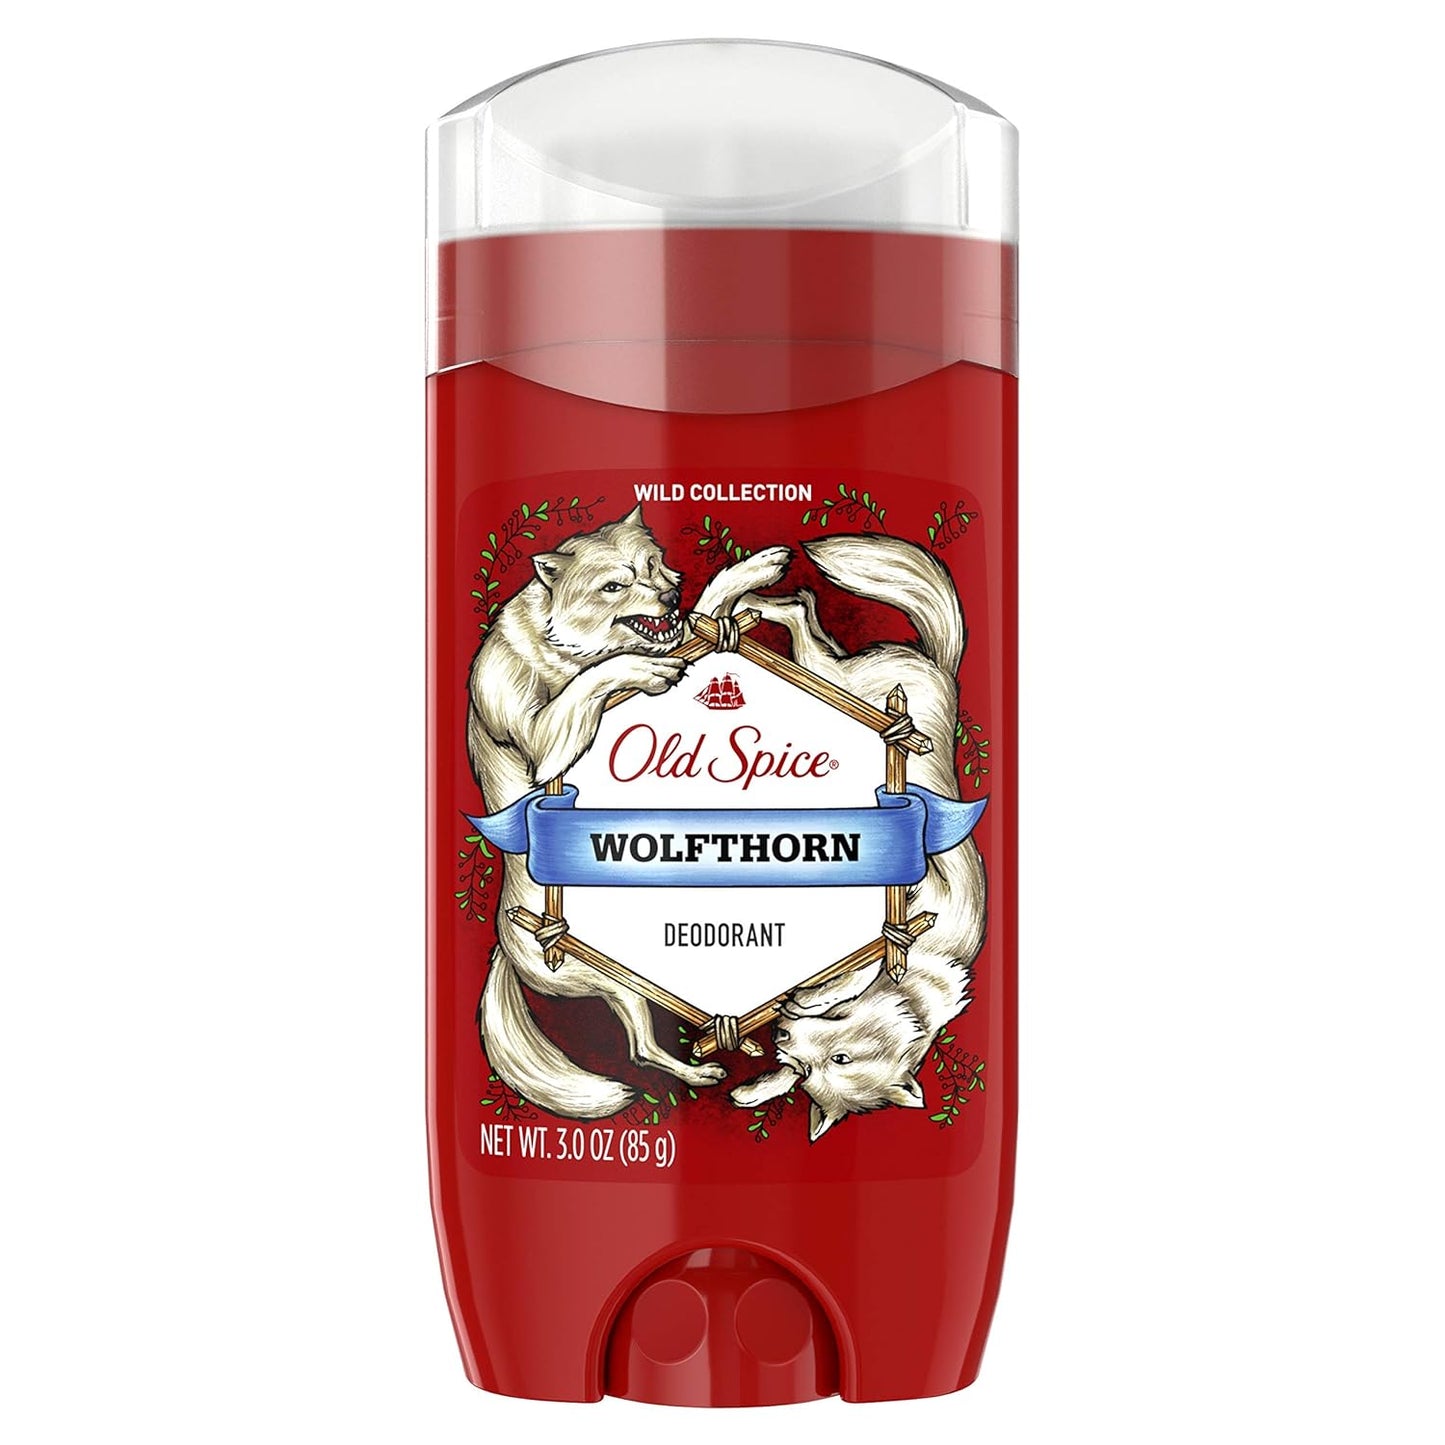 Old Spice Deodorant for Men, Wolfthorn Scent, Wild Collection, 3 oz, (Pack of 3)